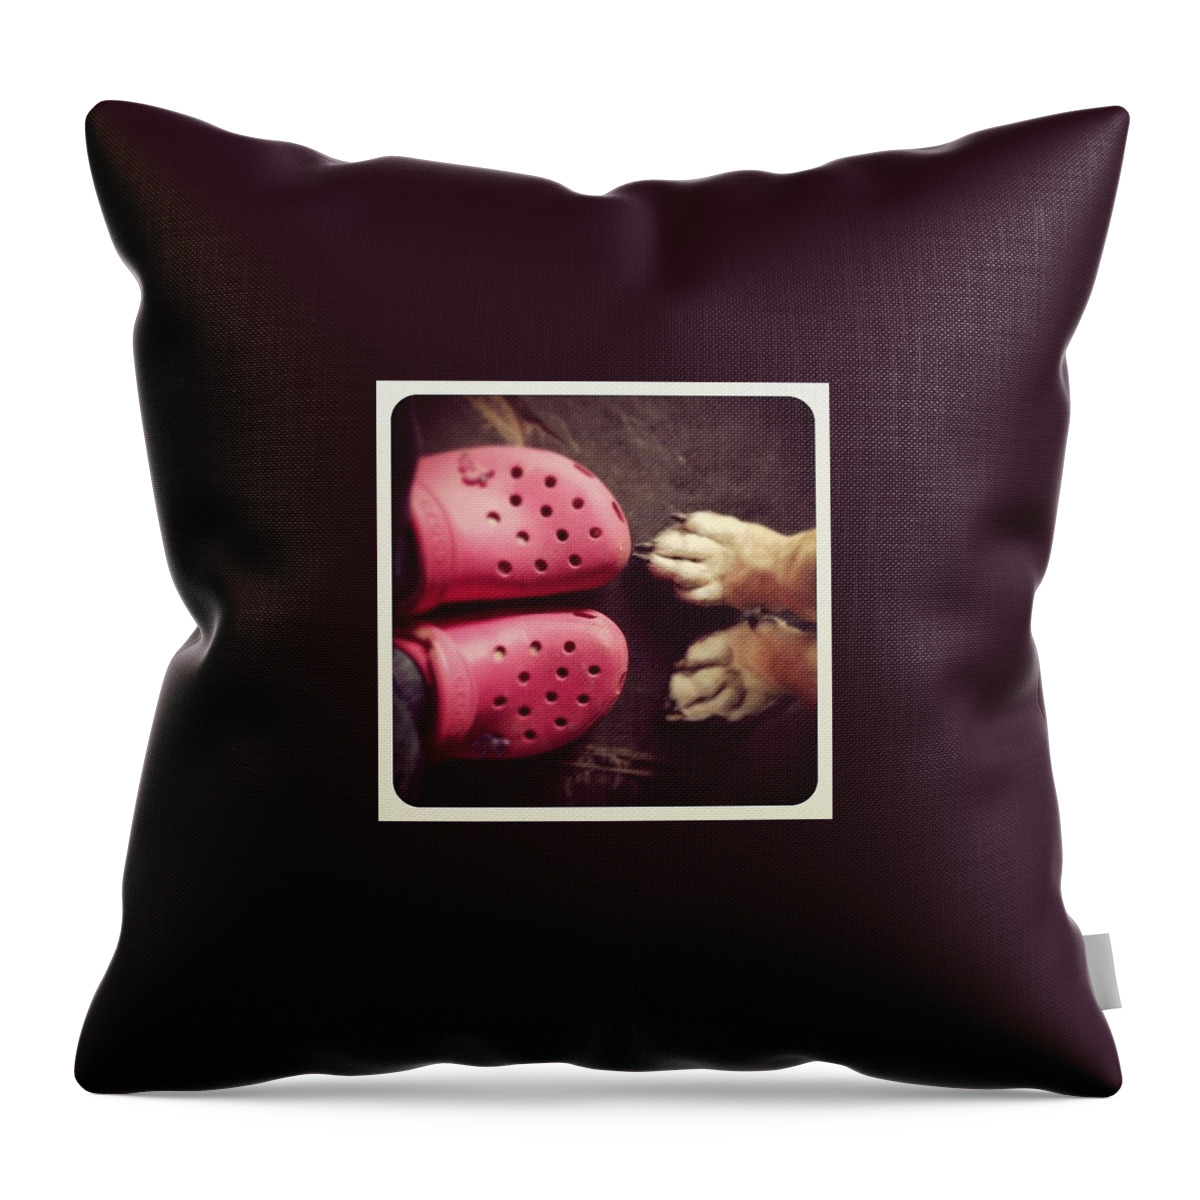 Huellas Throw Pillow featuring the photograph Instagram Photo by Florencia Rodriguez